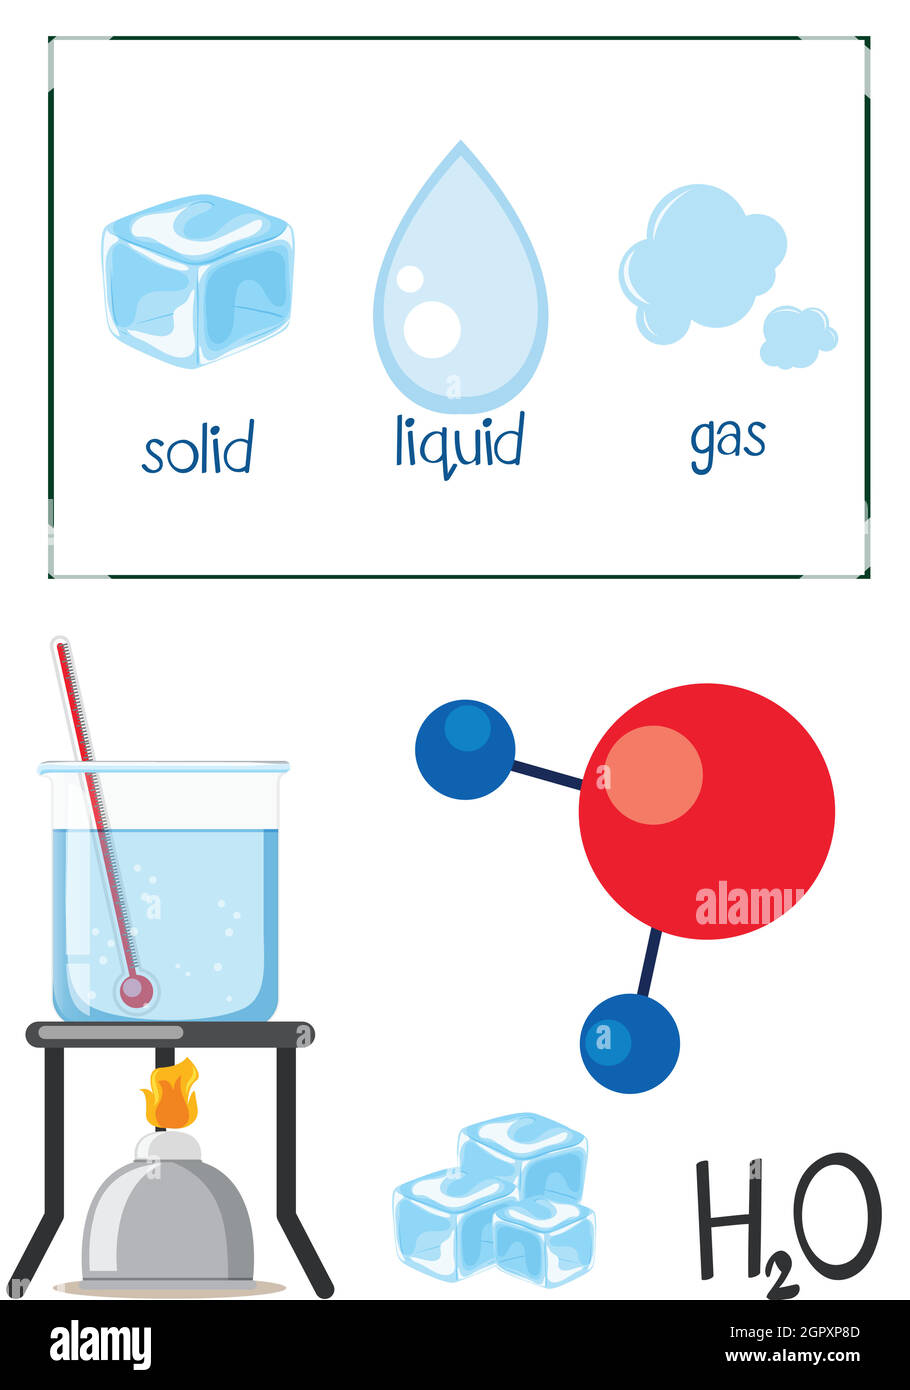 Water Science States of Matter Stock Vector